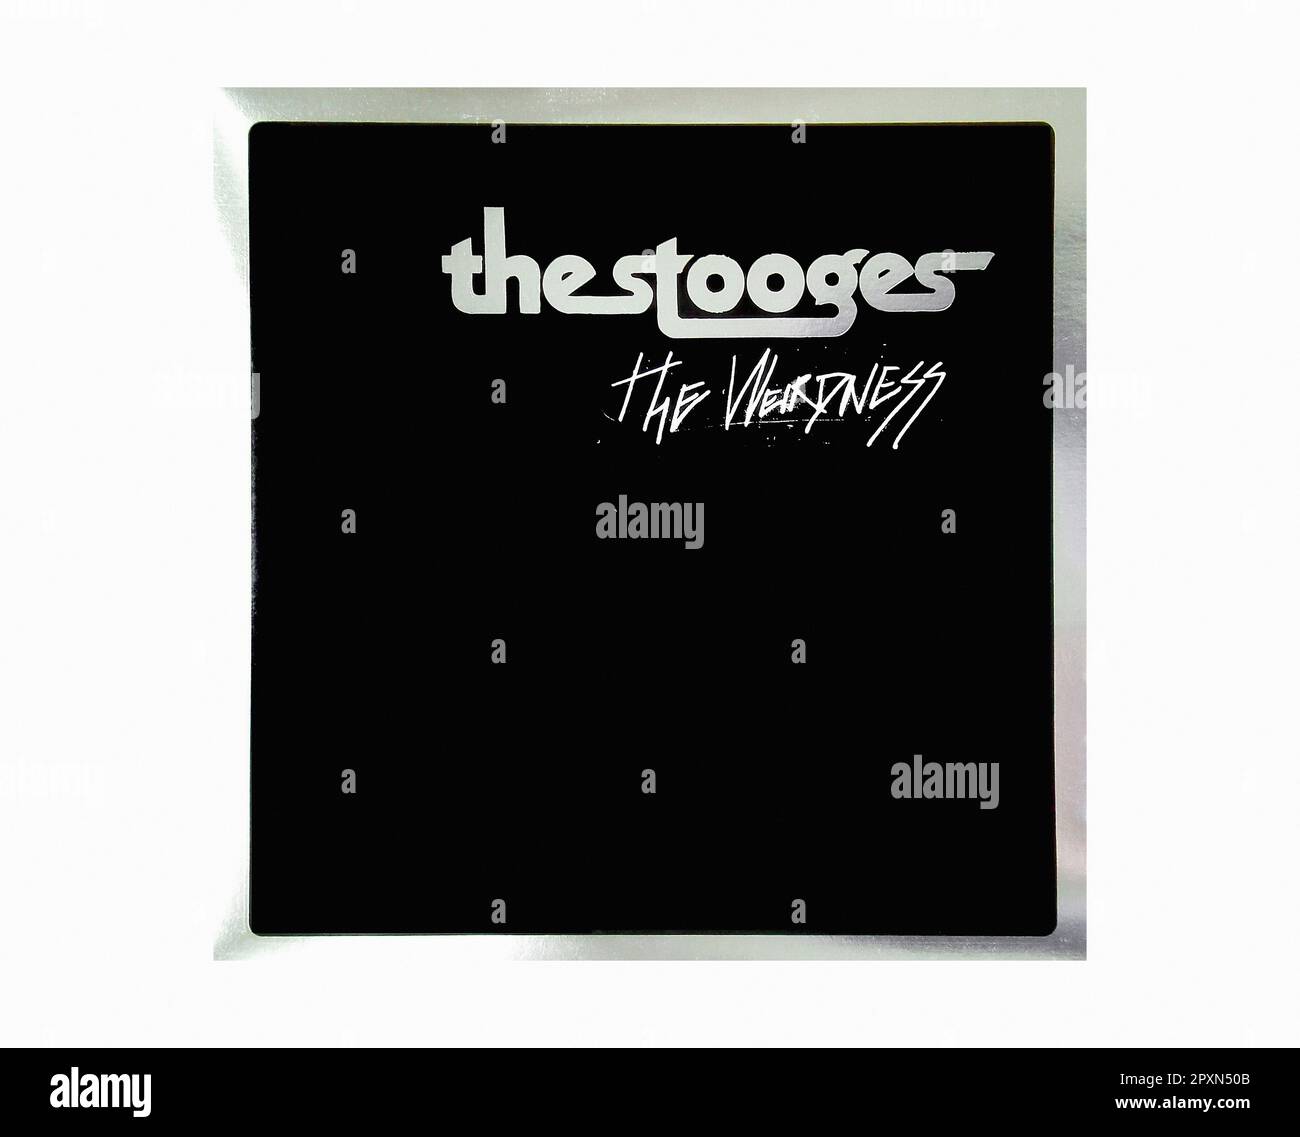 The Stooges - The weirdness [2007] - Vintage Vinyl Record Sleeve Banque D'Images